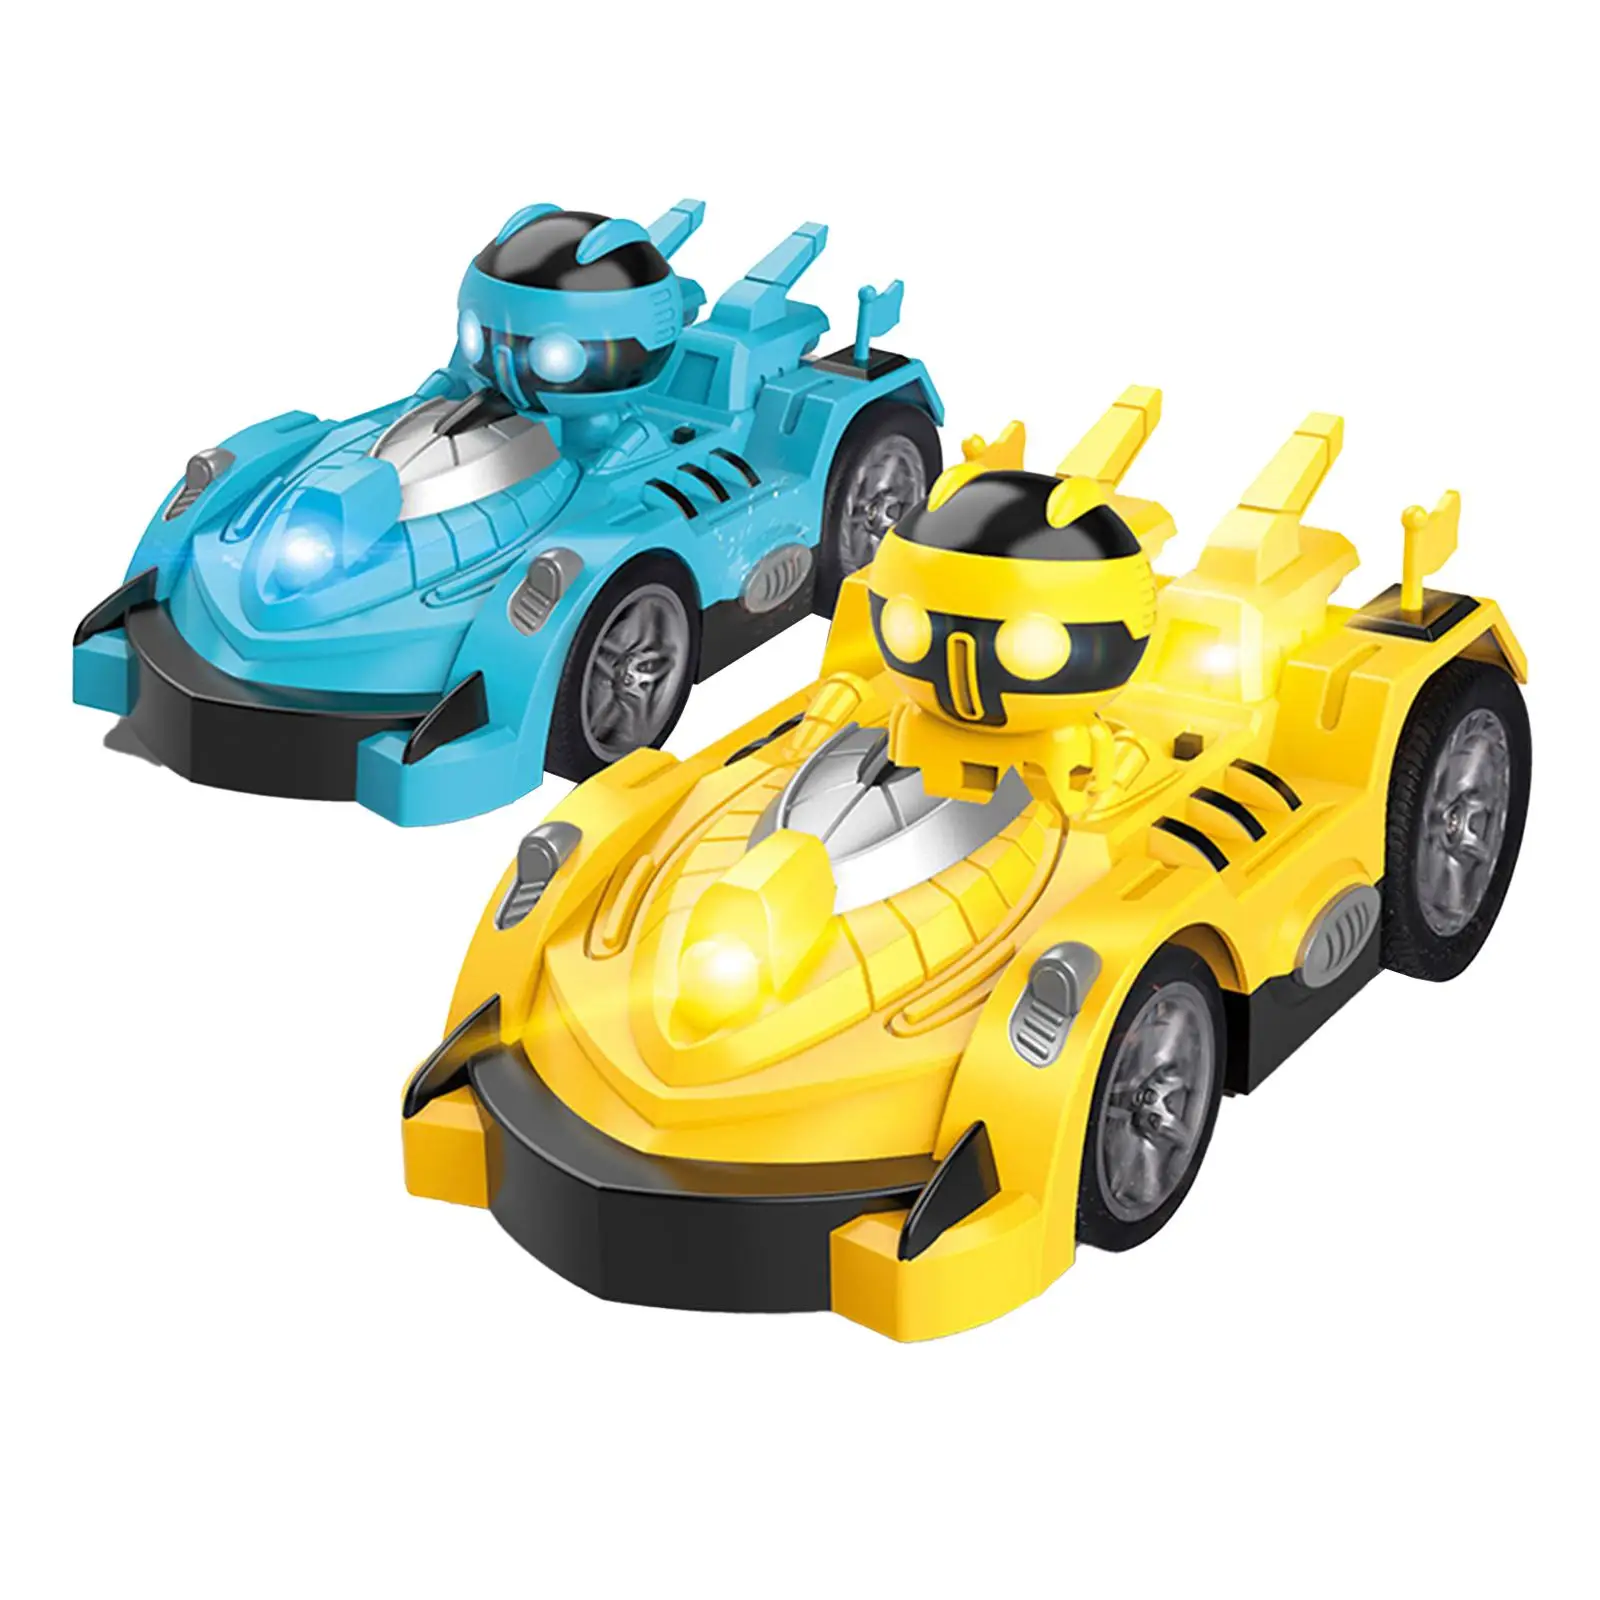 2Pcs Remote Control Toys Bumper Car Crash Bounce Ejection Light Party Favor Durable High Speed for Adults Teens Children Holiday